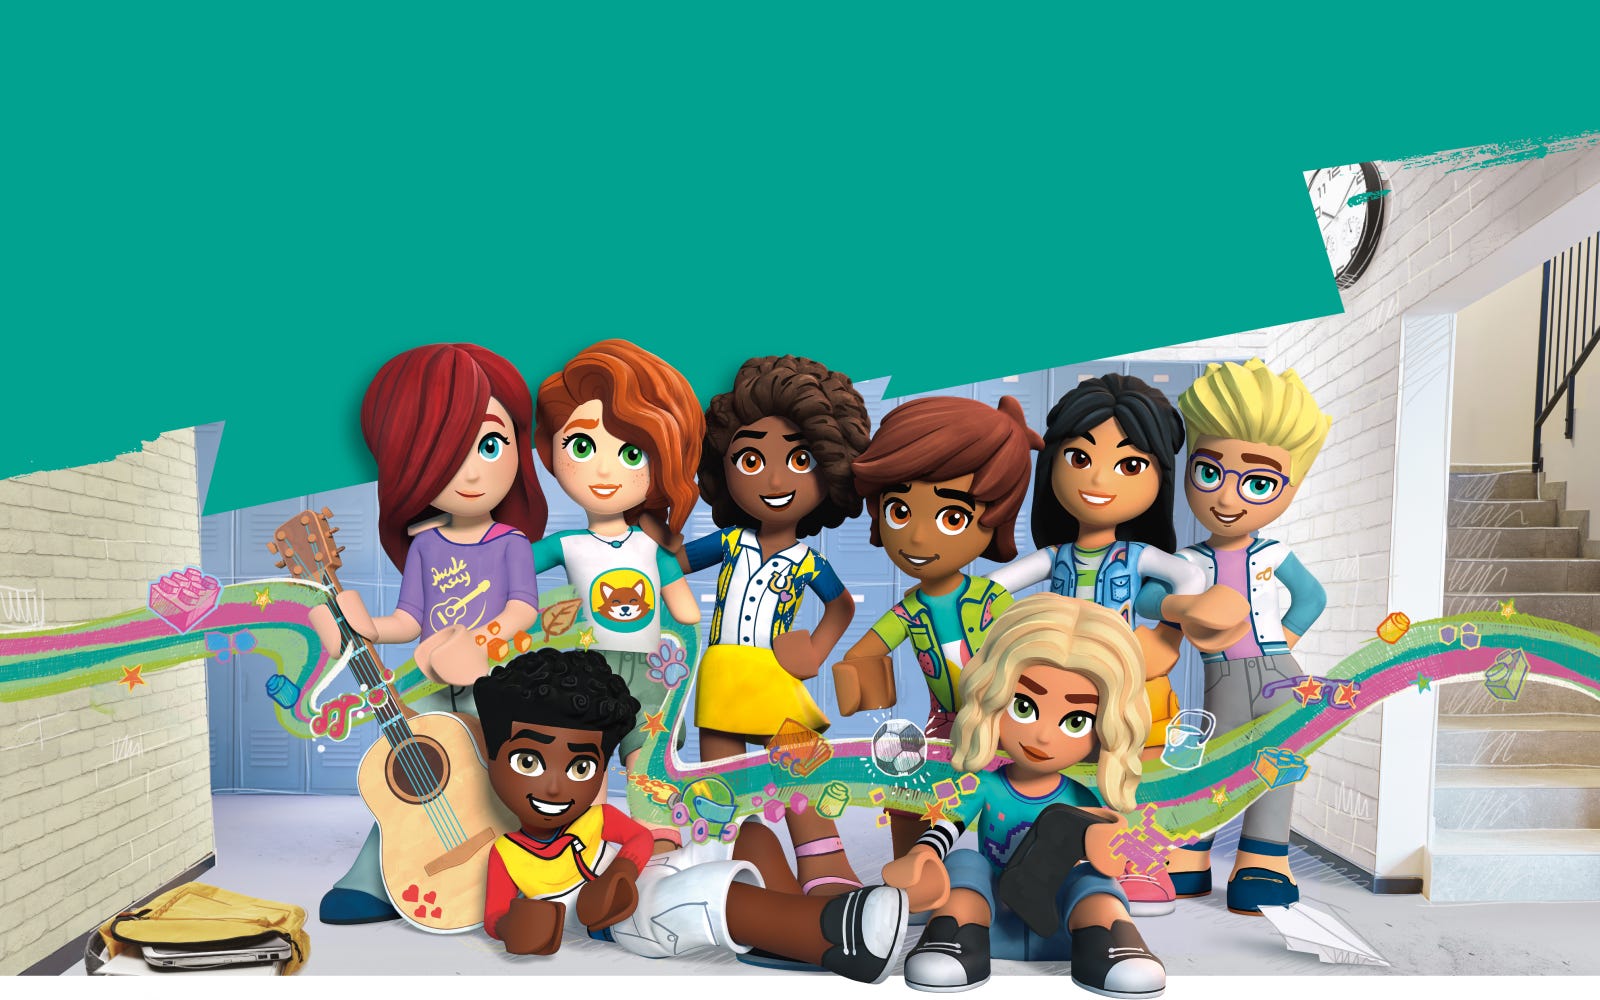 LEGO® Friends Introducing a new world of friends | Official LEGO ...